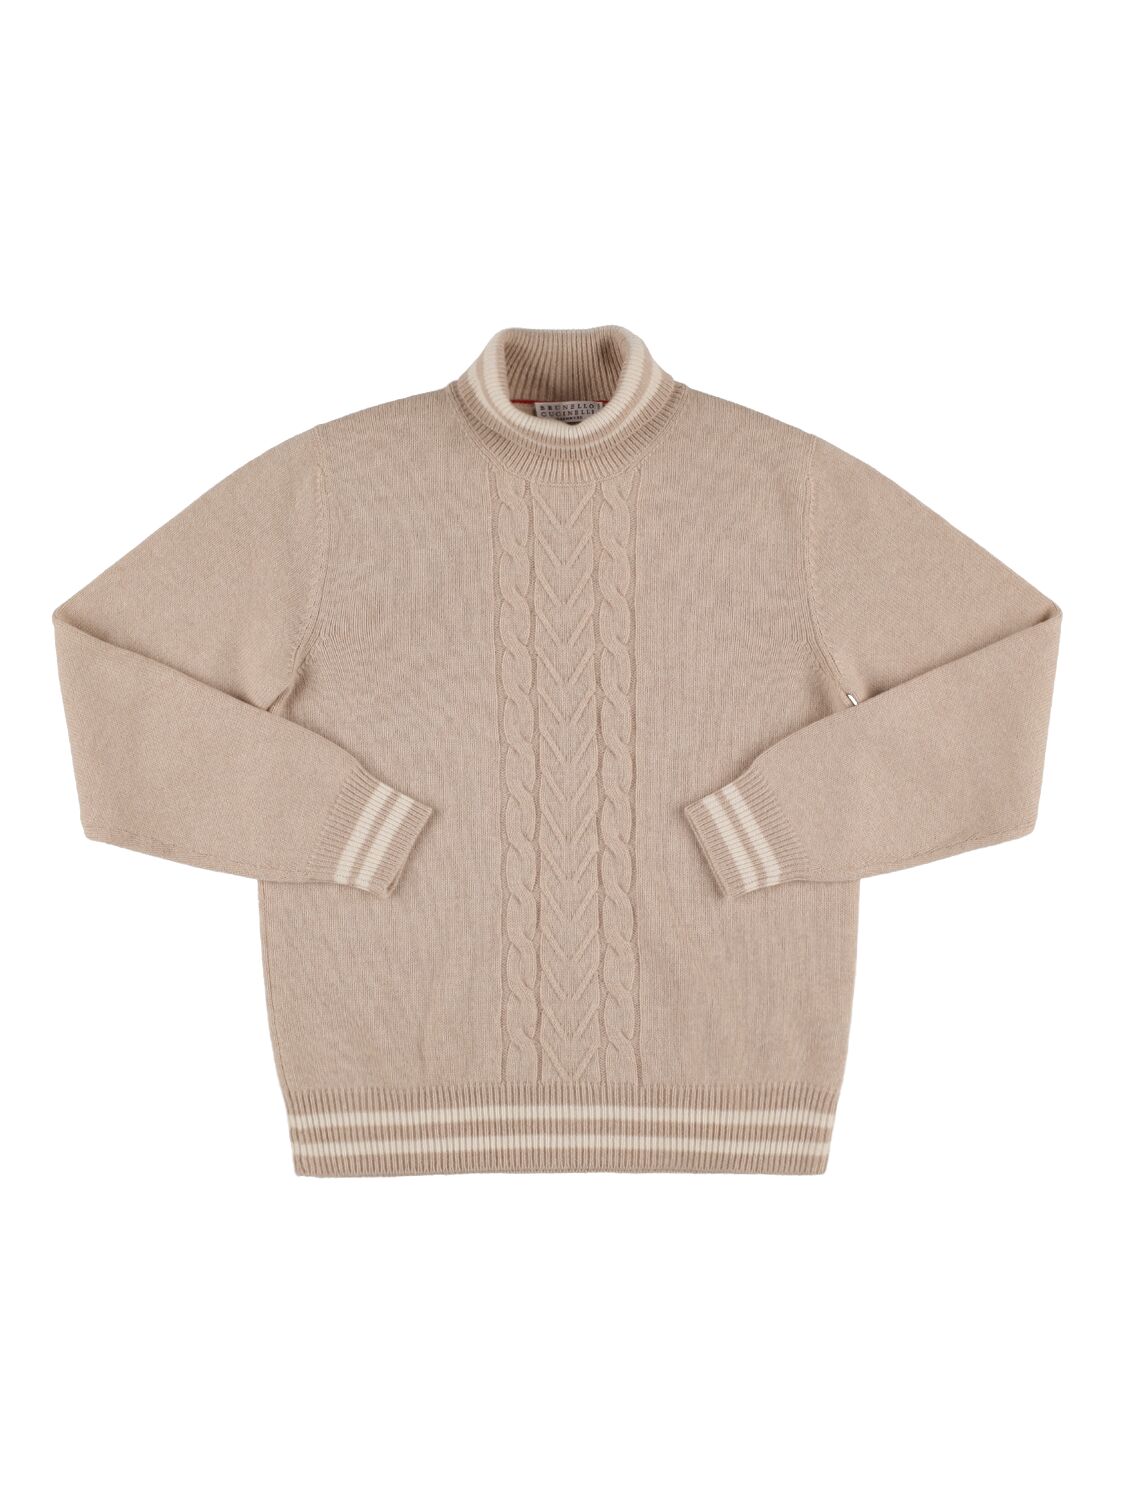 Image of Cashmere Cable Knit Turtleneck Sweater